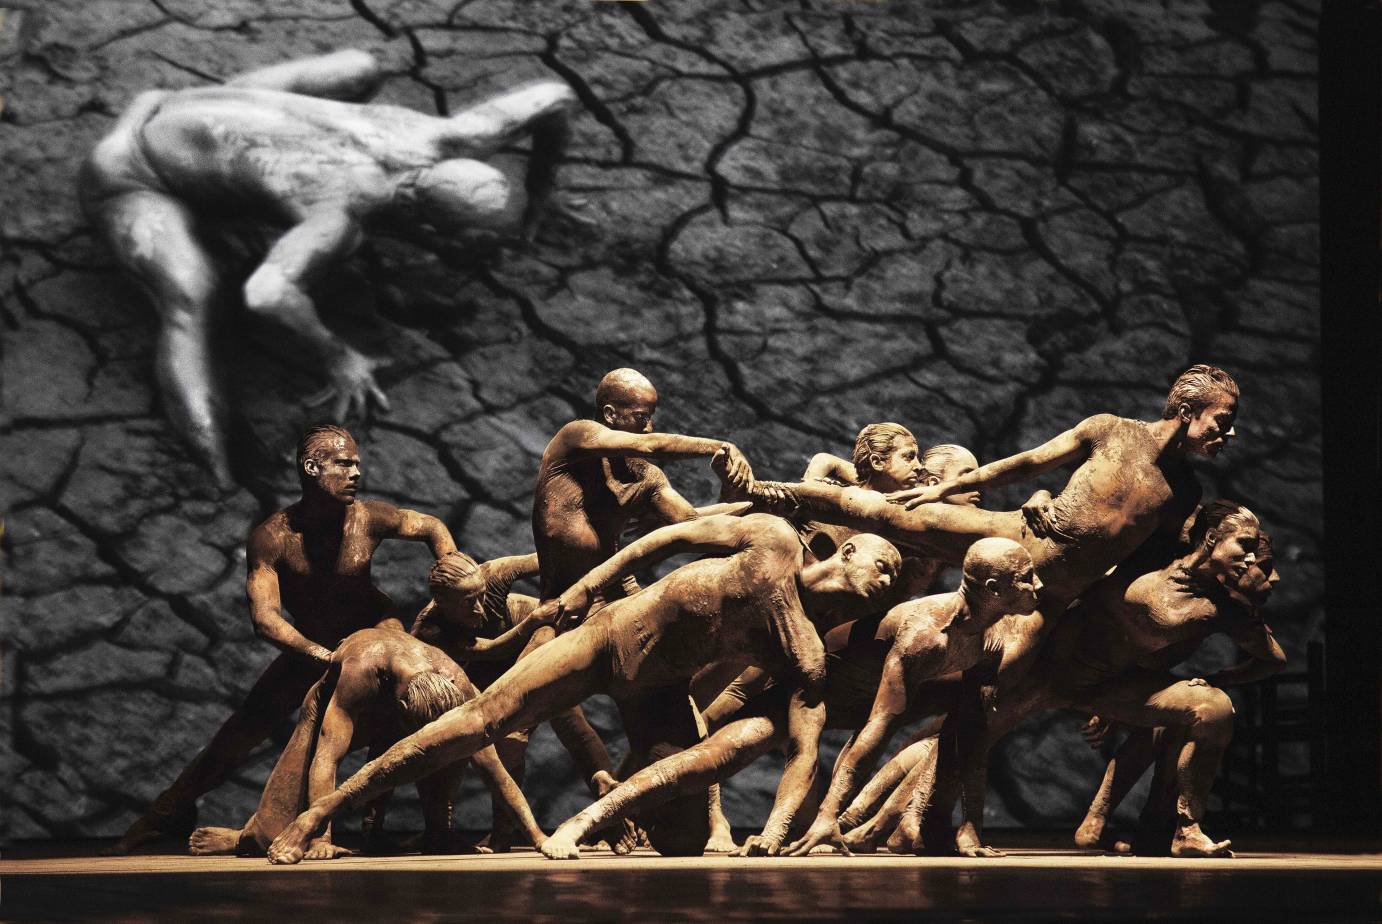 Against a black and white film, mud-caked dancers lunge in a clump